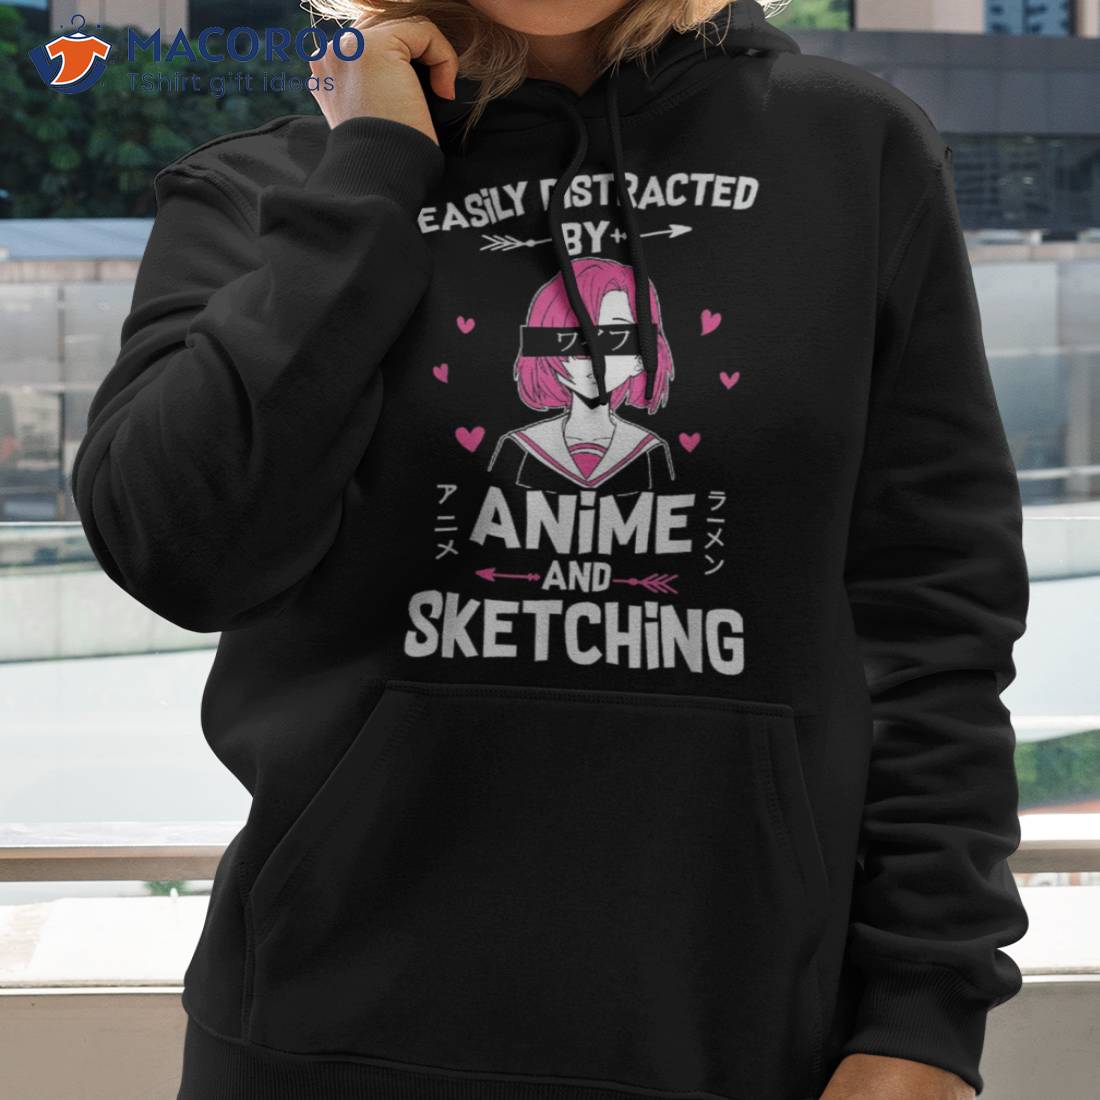 Just A Girl Who Loves Anime And Sketching Drawing Art Gifts Shirt